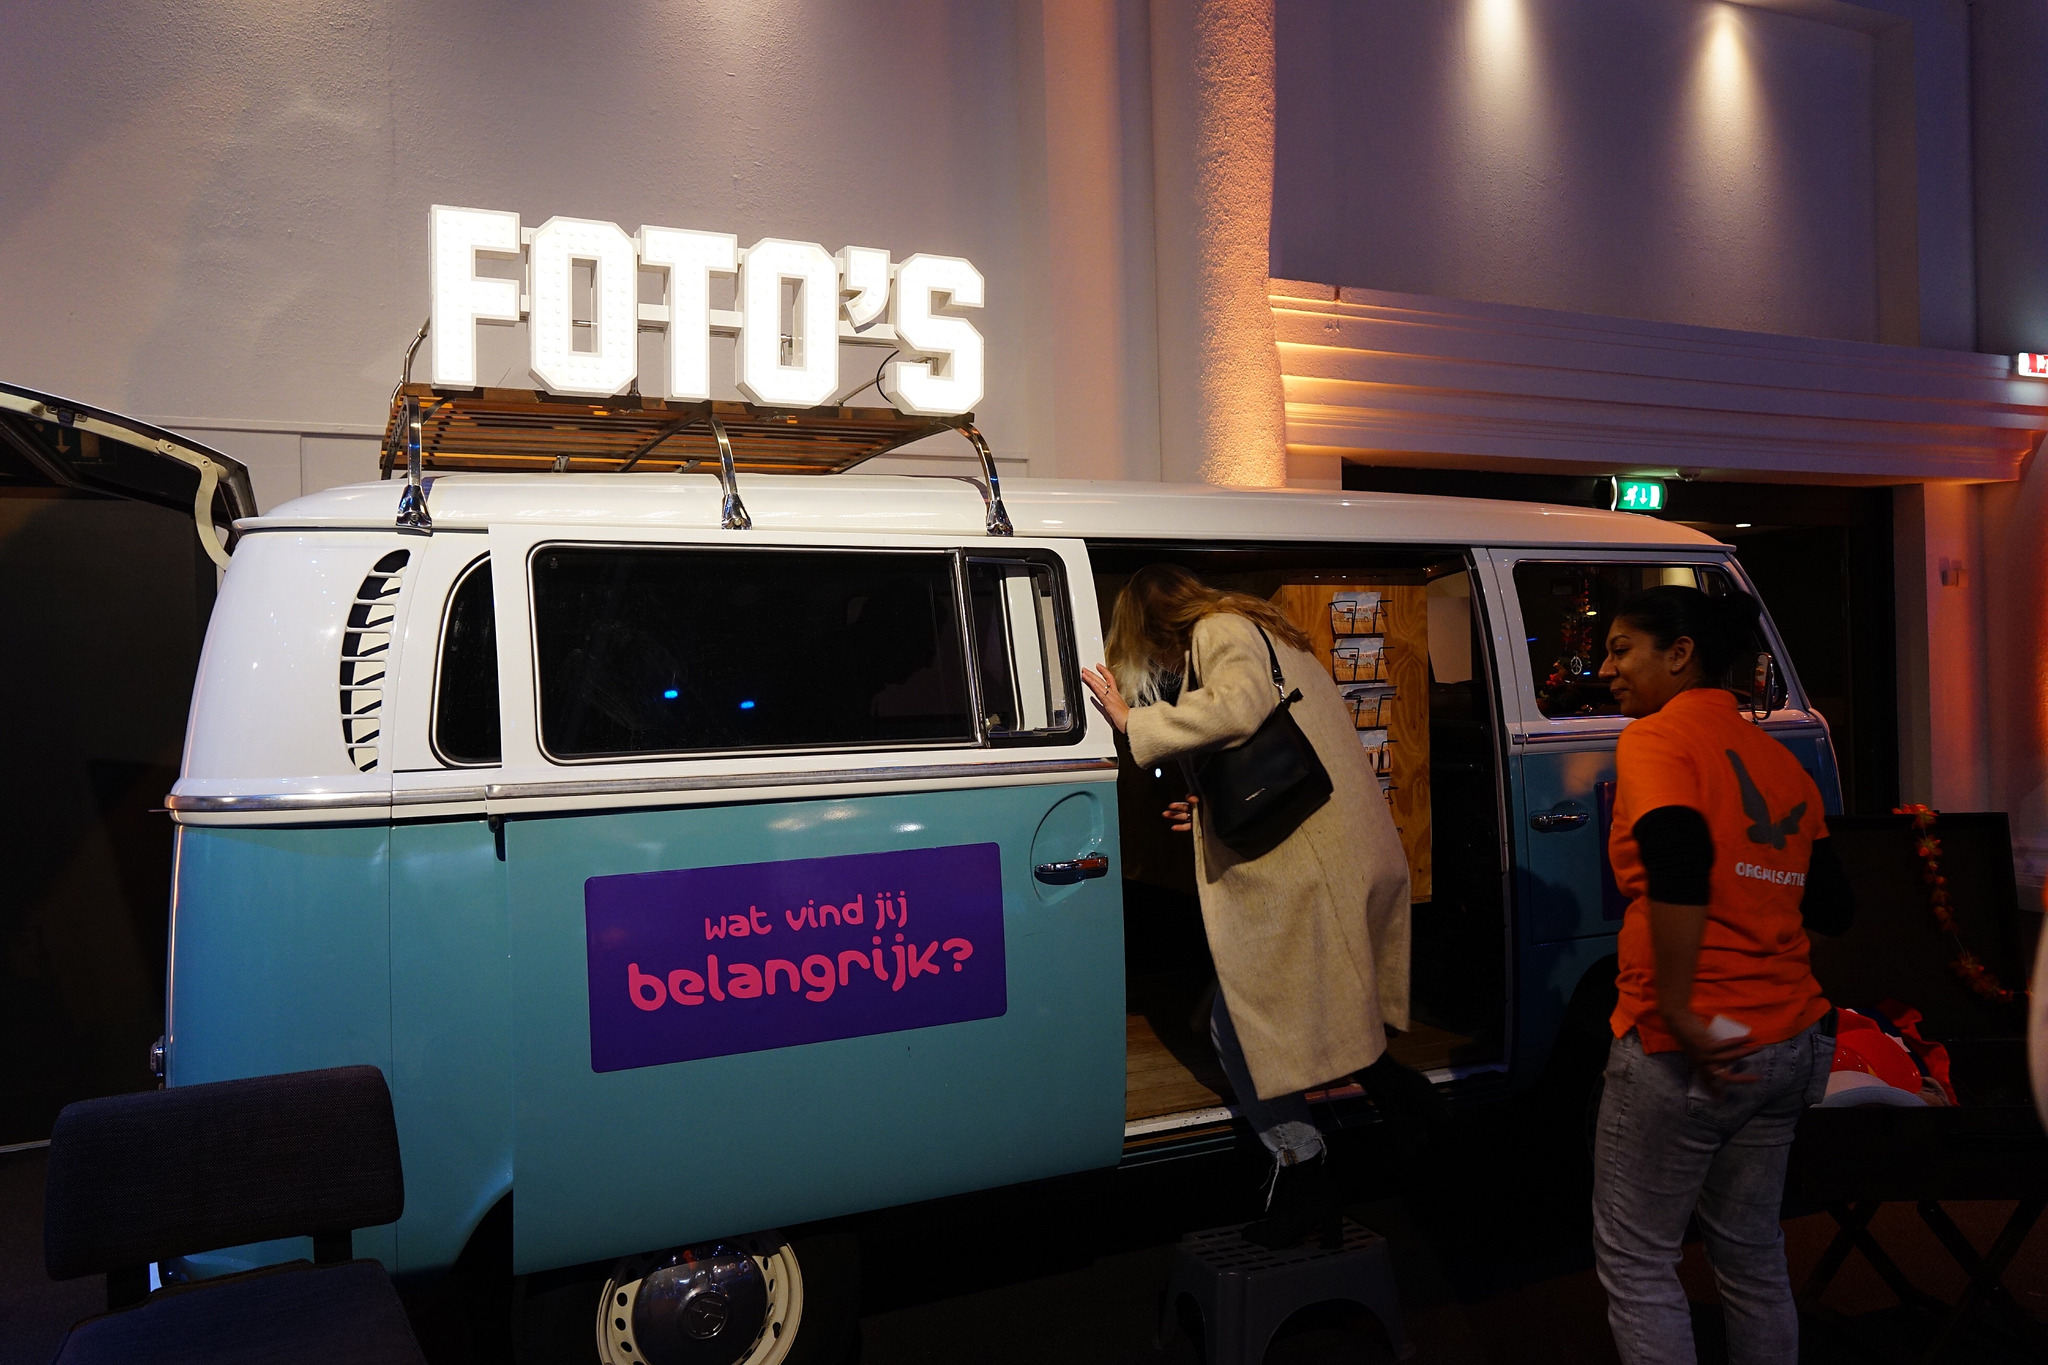 Fotobus MpowerS connect 2021 - Nationaal MS Fonds